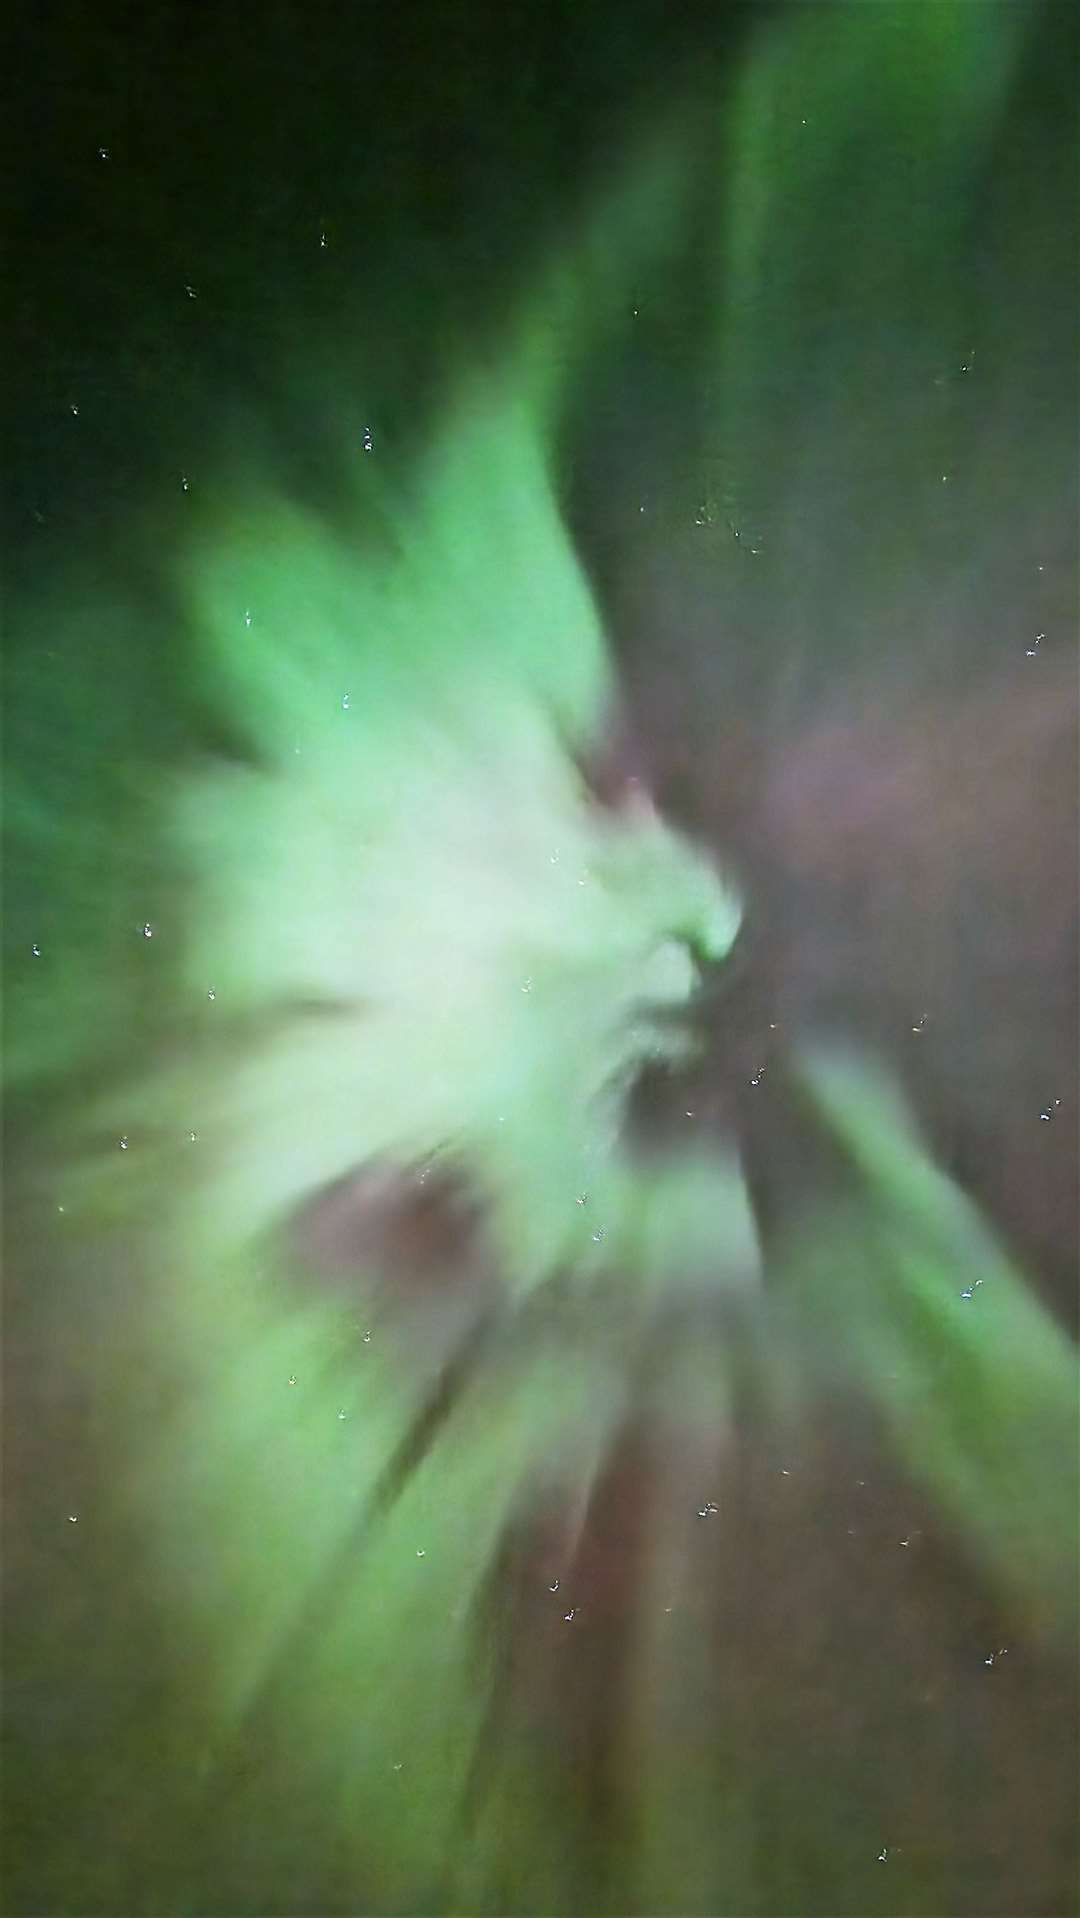 The aurora picture taken by Scott Livingstone last night. It appears to have a face.